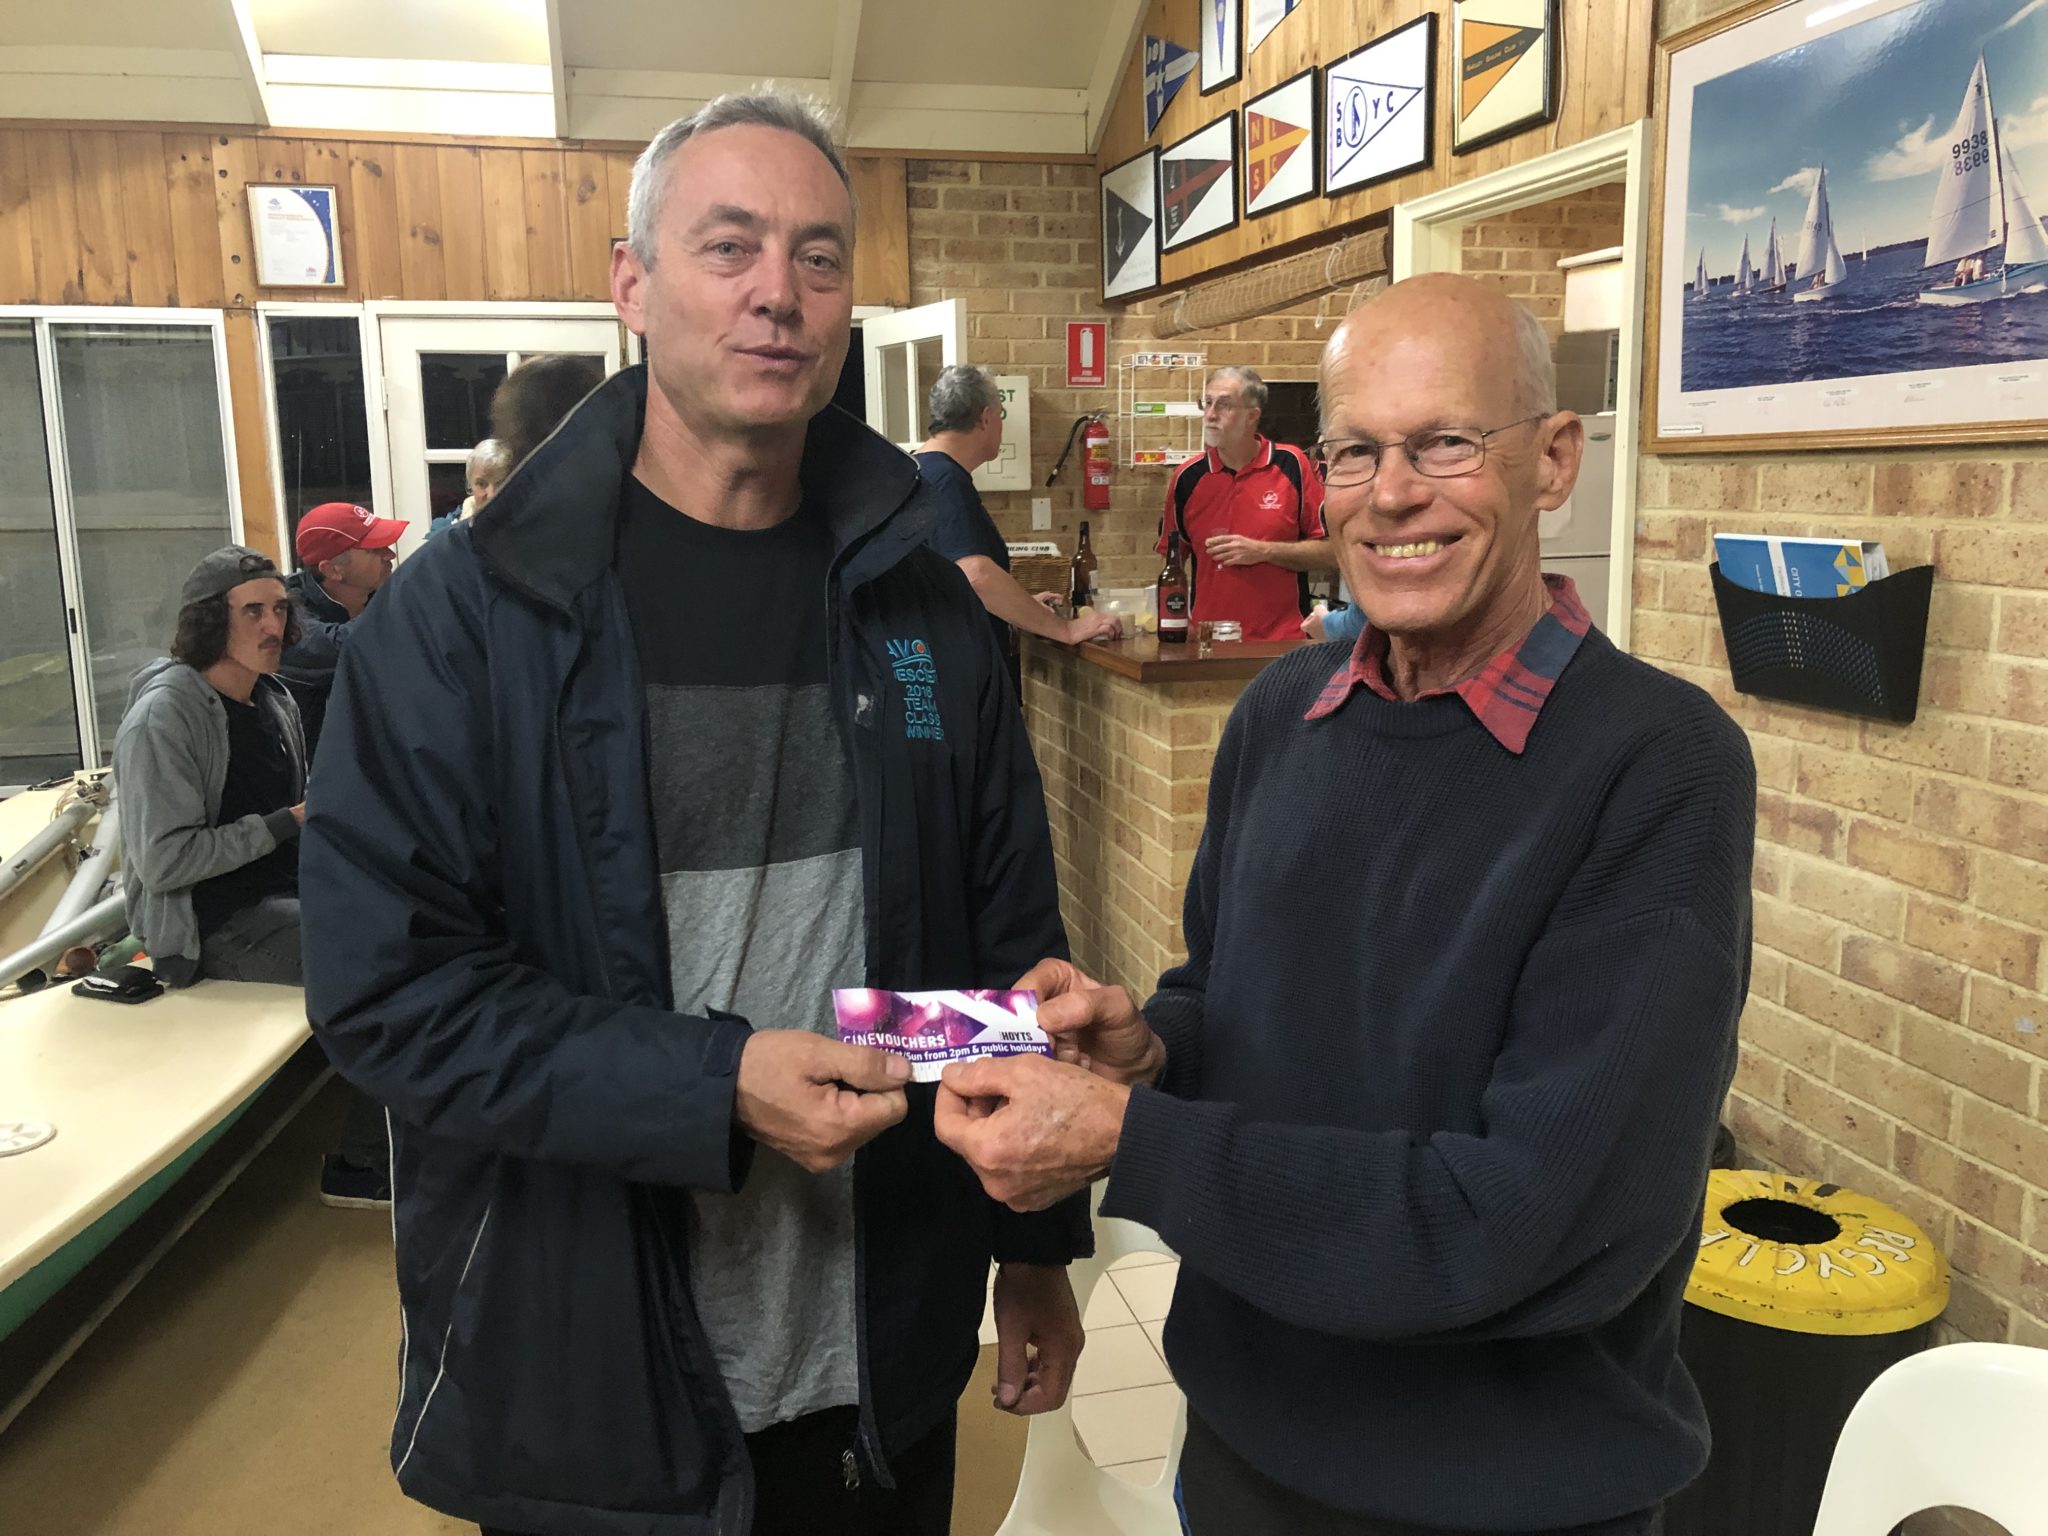 Tuesday 30th July 2019 : Tonight’s photo shows club member John Reddel presenting tonight’s winner Luc Jacob with a movie voucher.